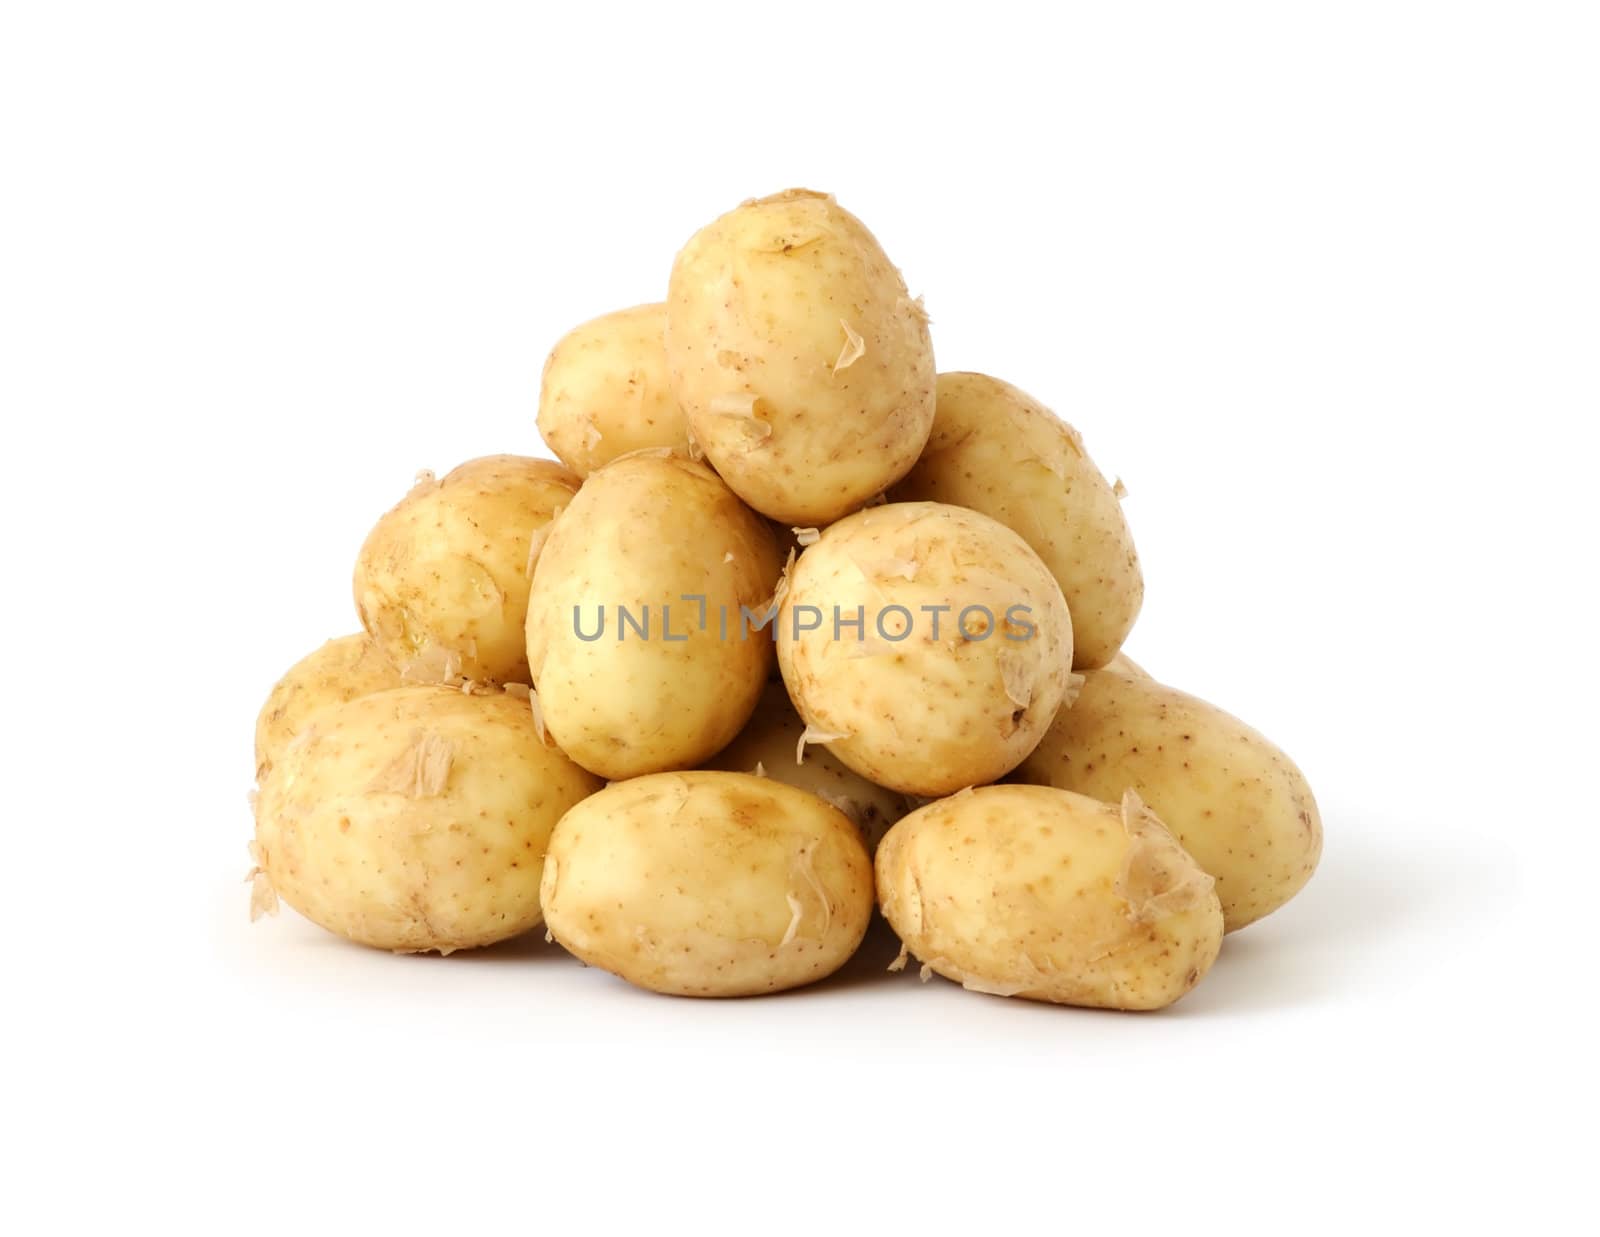 A handful of new potatoes isolated on a white background